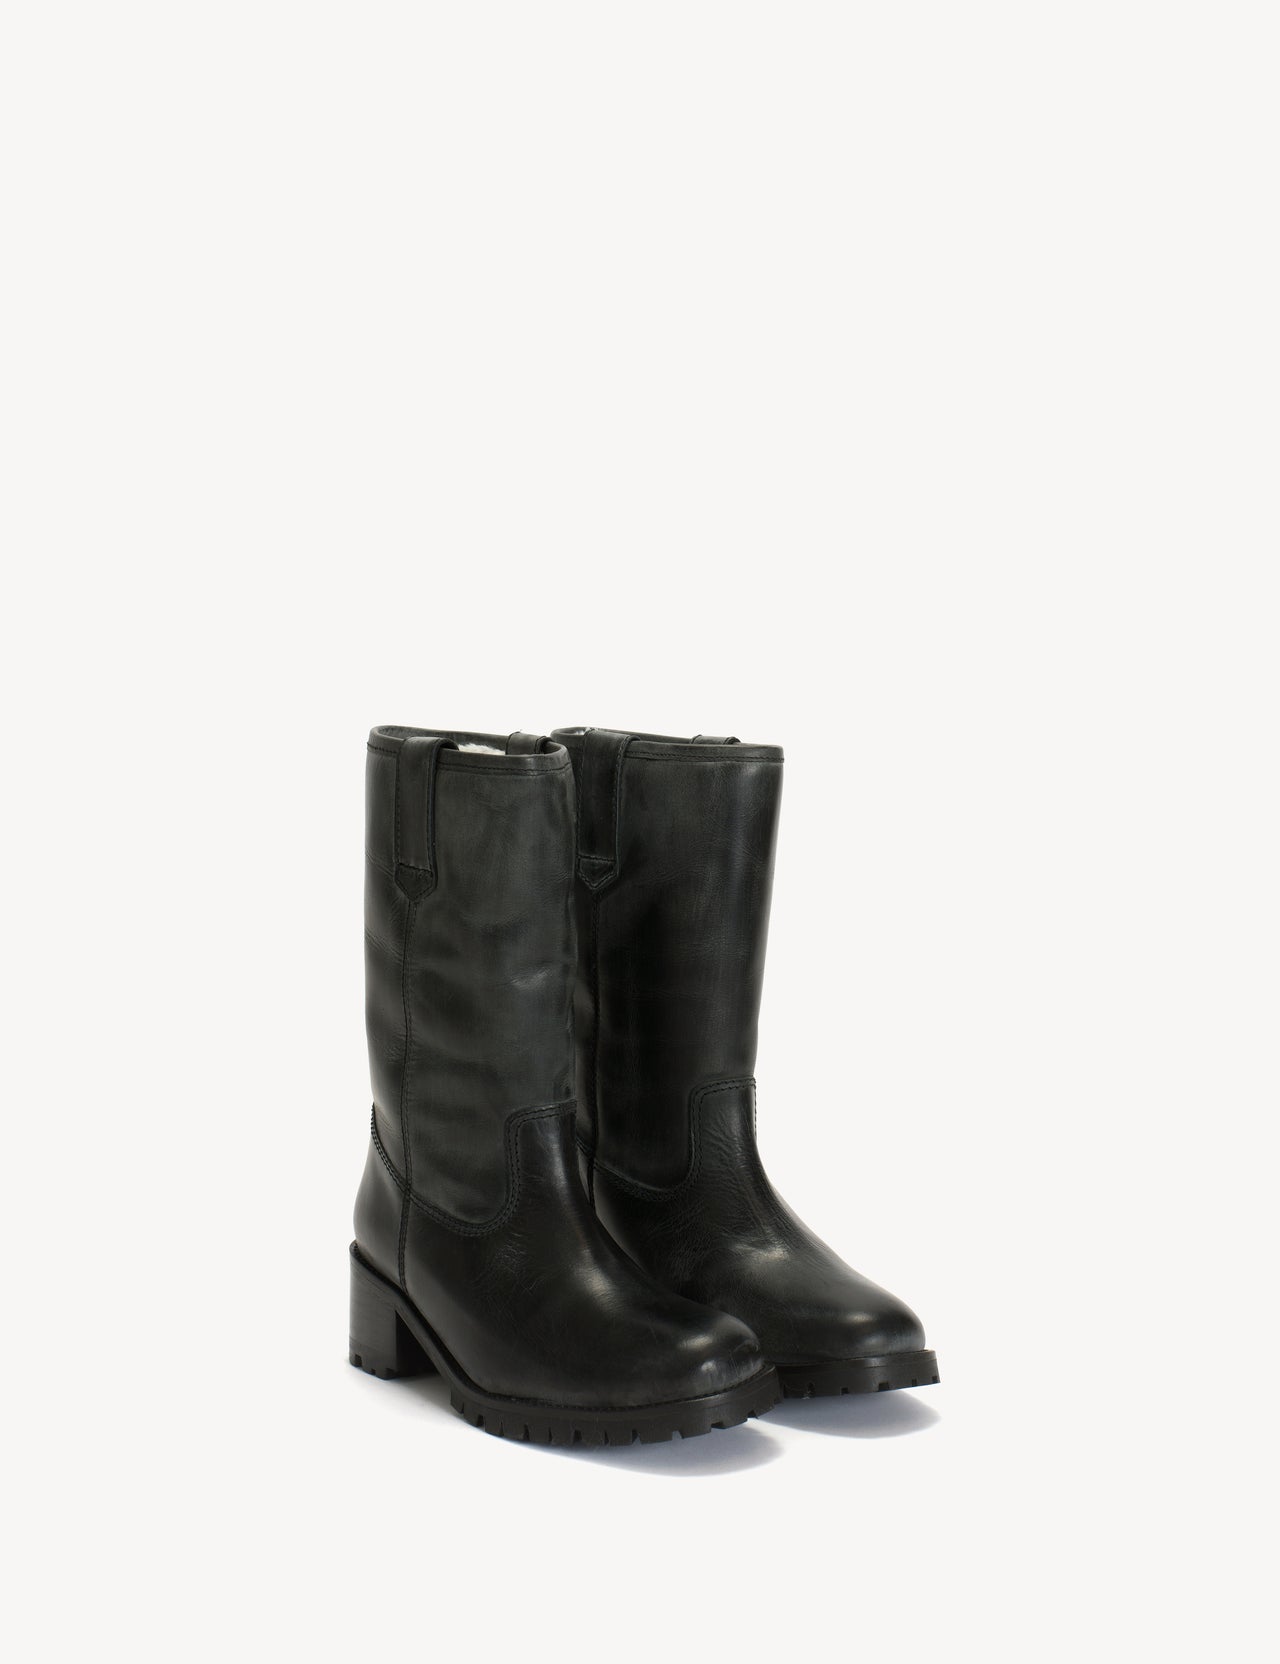 Kimmi Boot In Charcoal Black Escovado Leather with 50mm heel